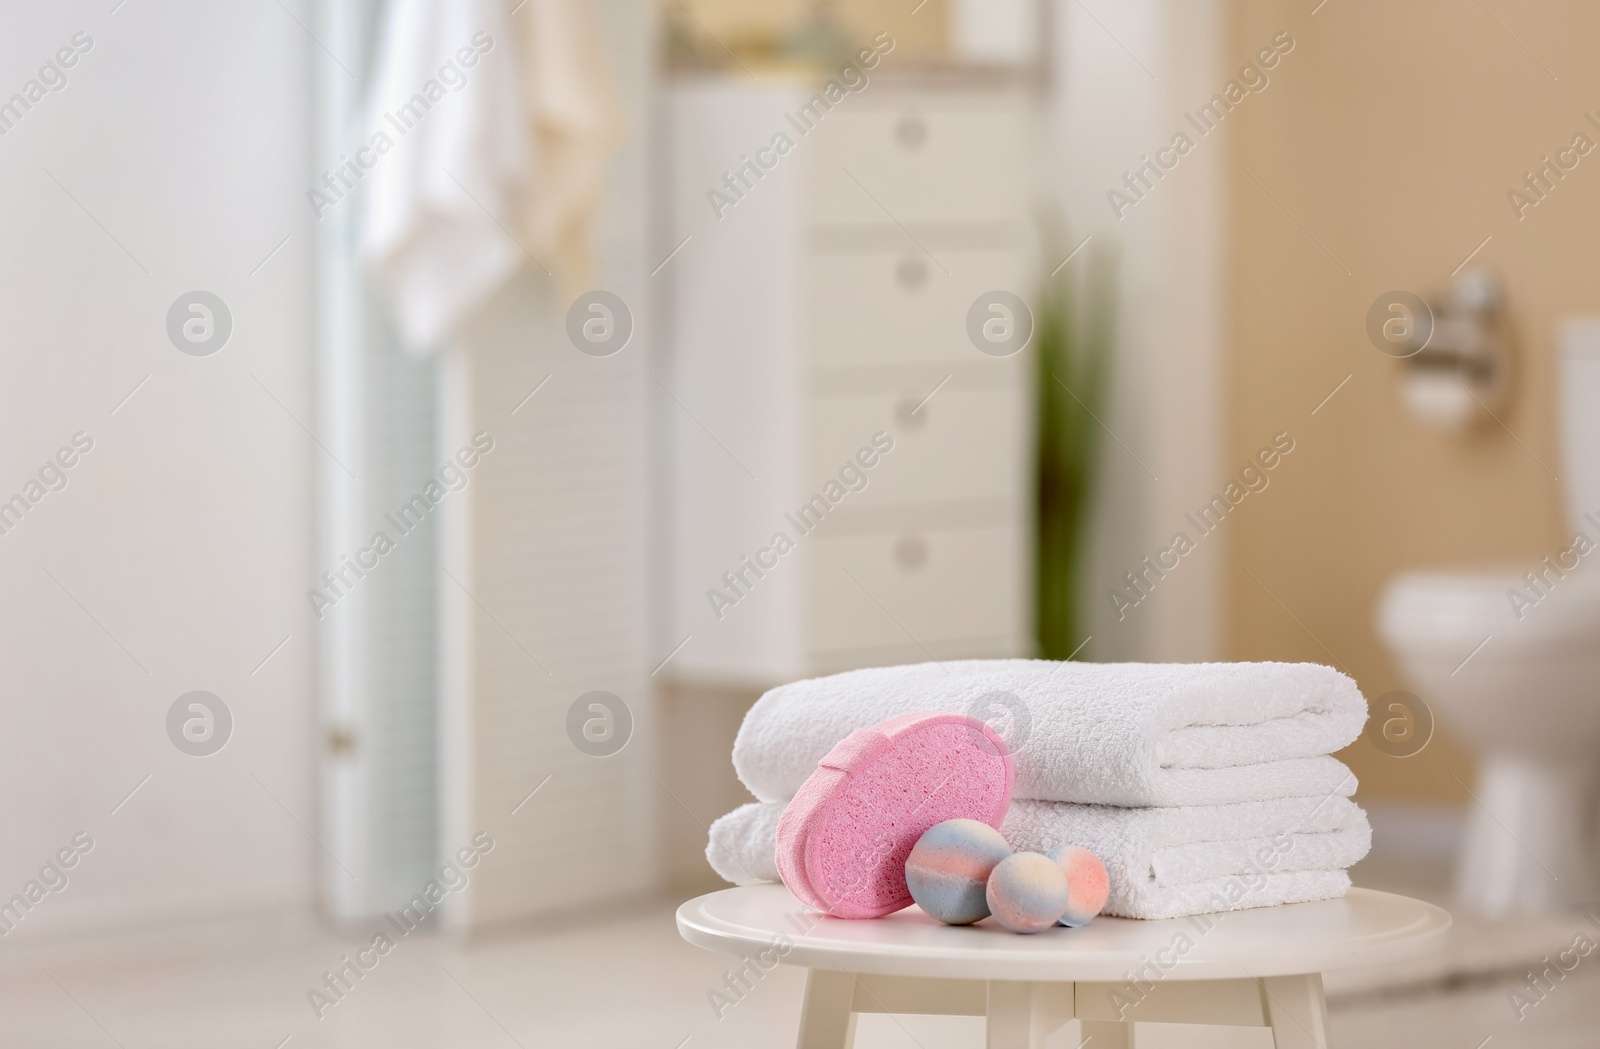 Photo of Clean towels and toiletries on table against blurred background